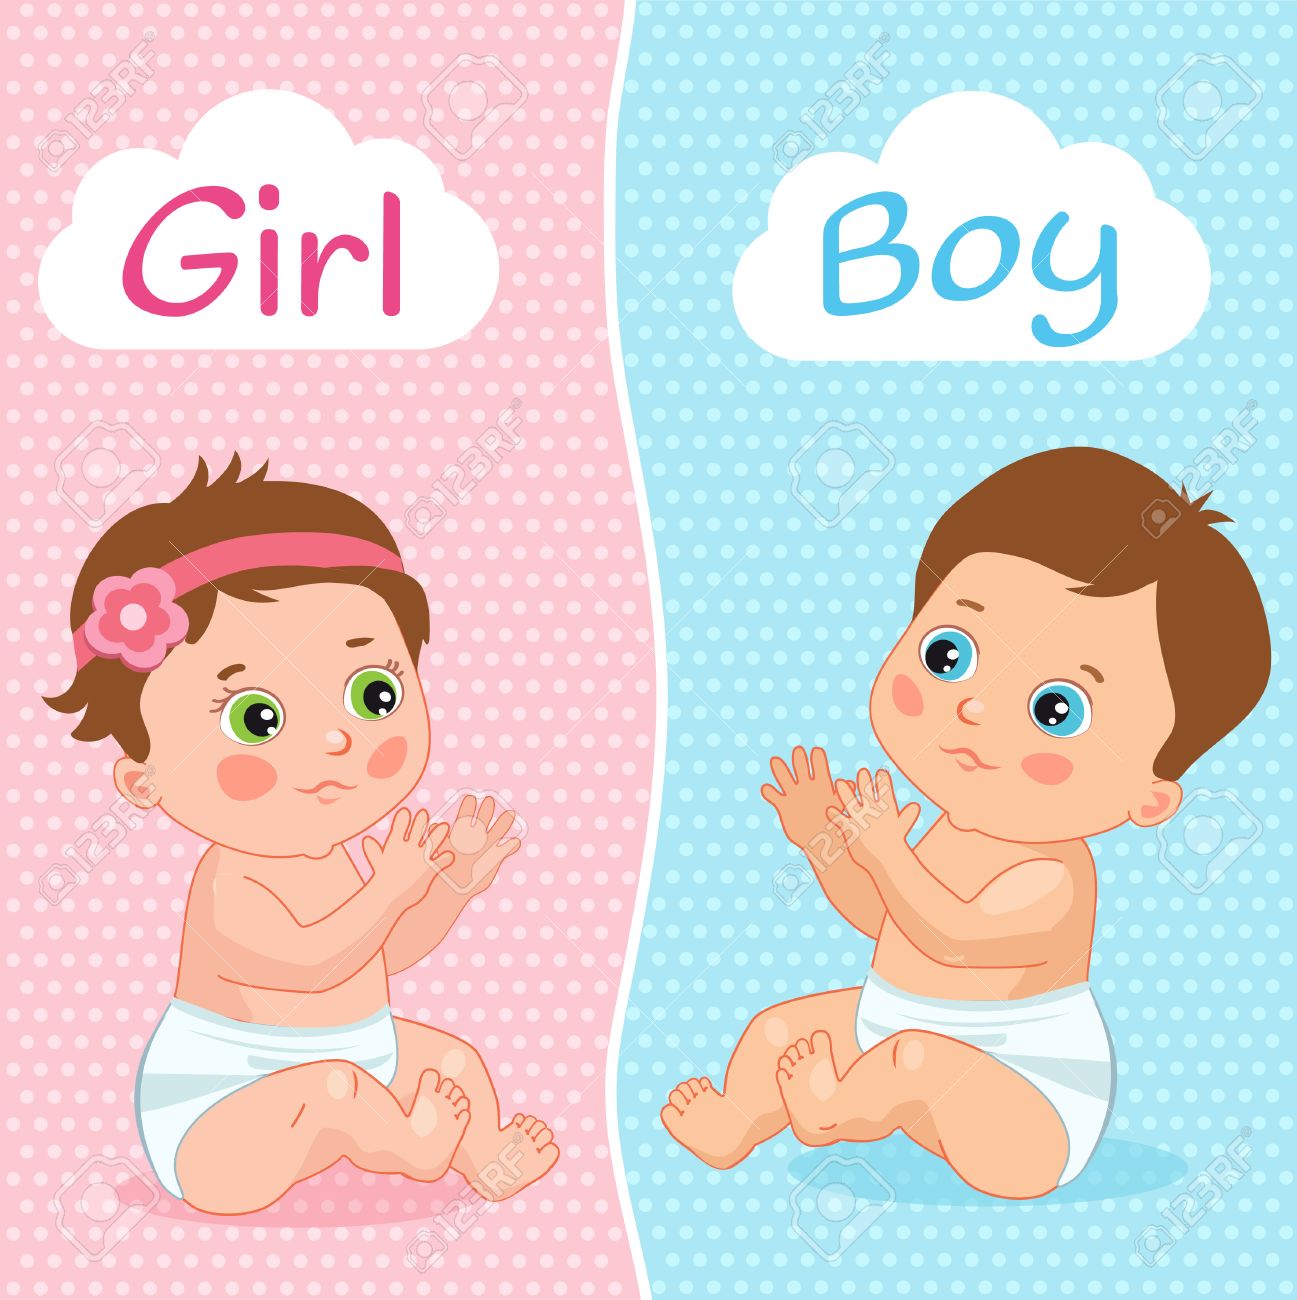 Baby Boy And Baby Girl Vector Illustration. Two Cute Cartoon...